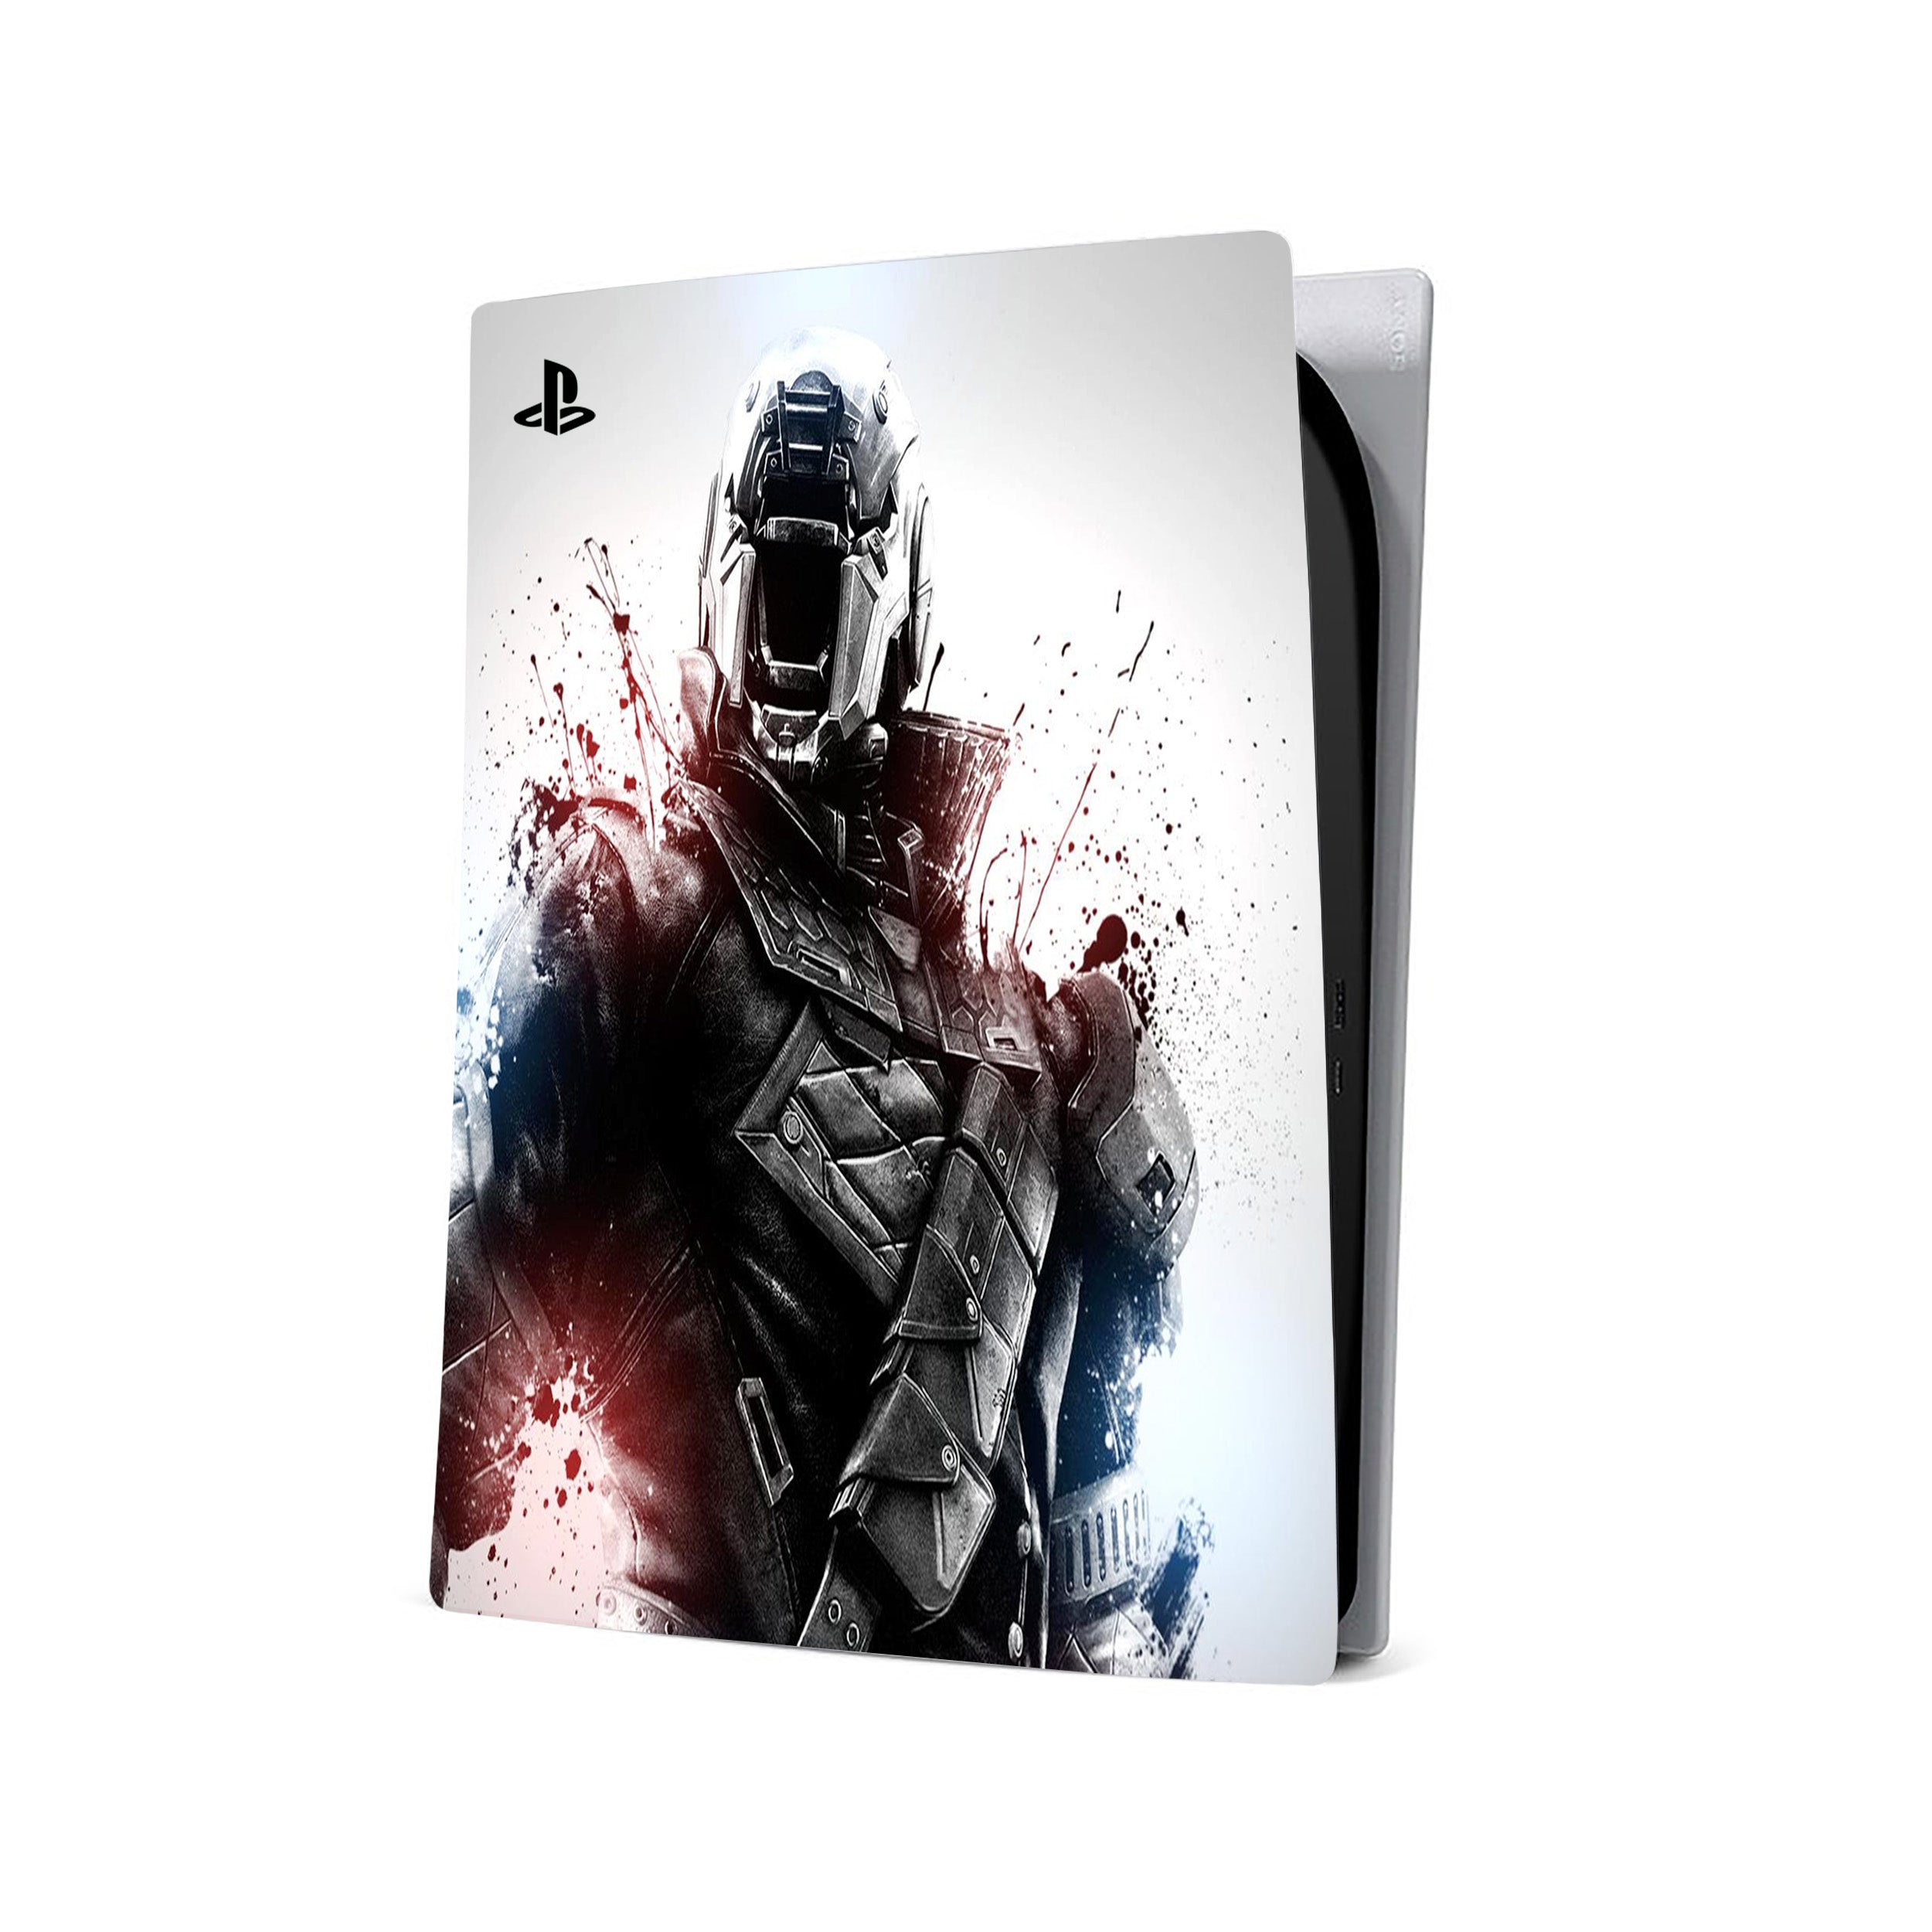 A video game skin featuring a Destiny design for the PS5.